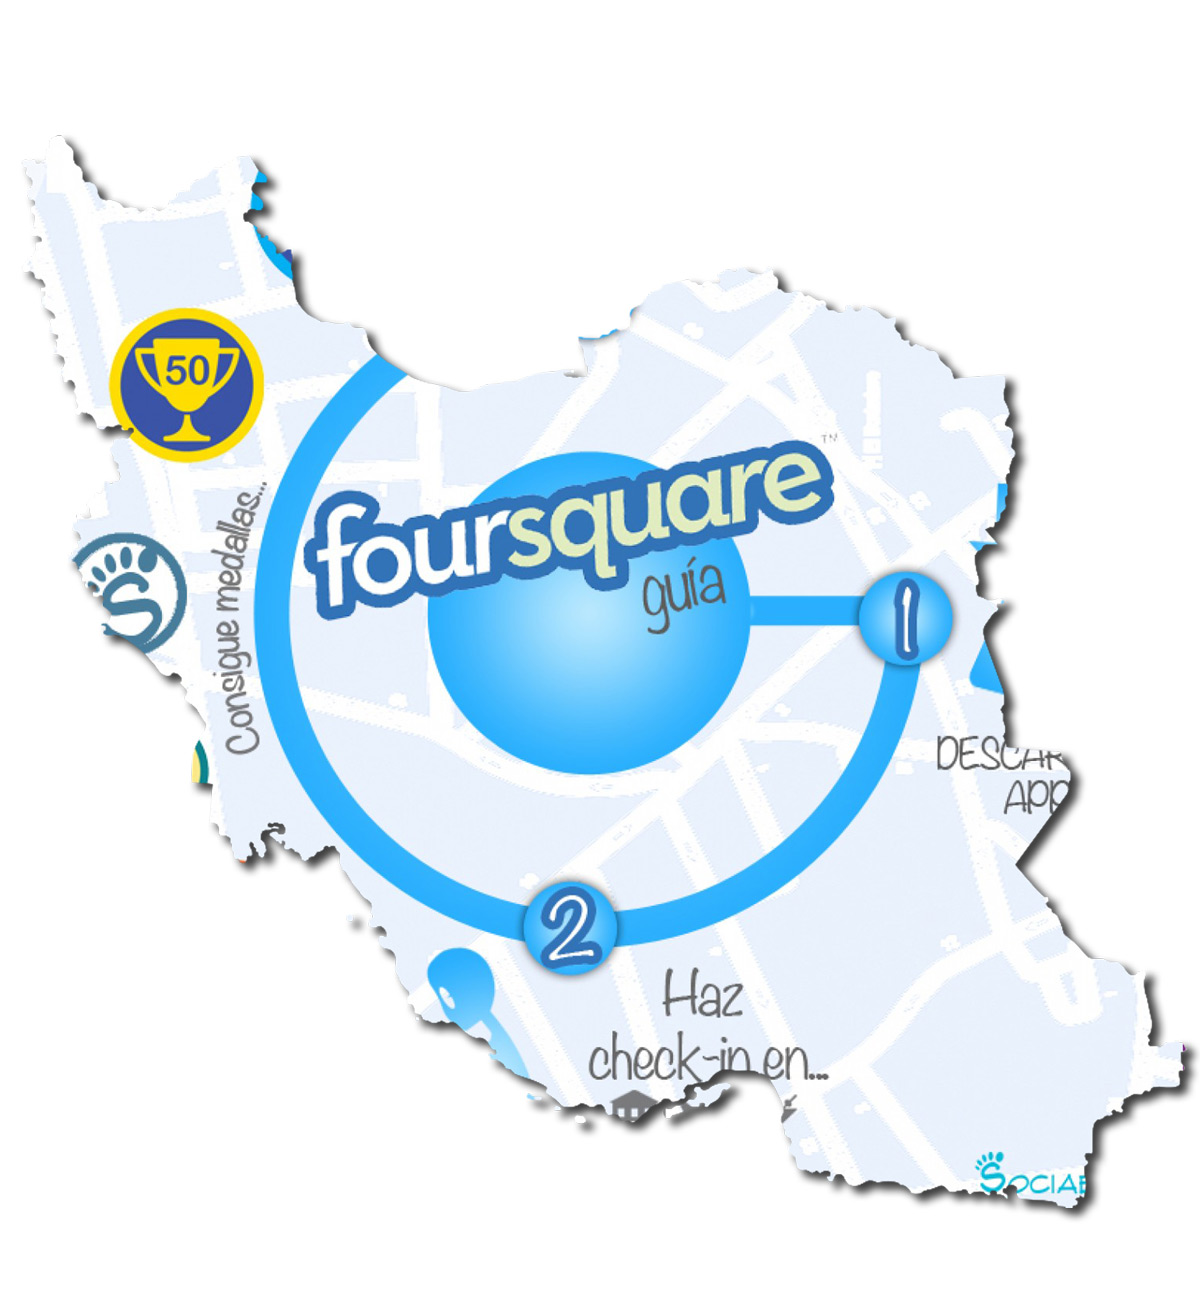 how-to-use-foursquare_502919be8fda1_w1500